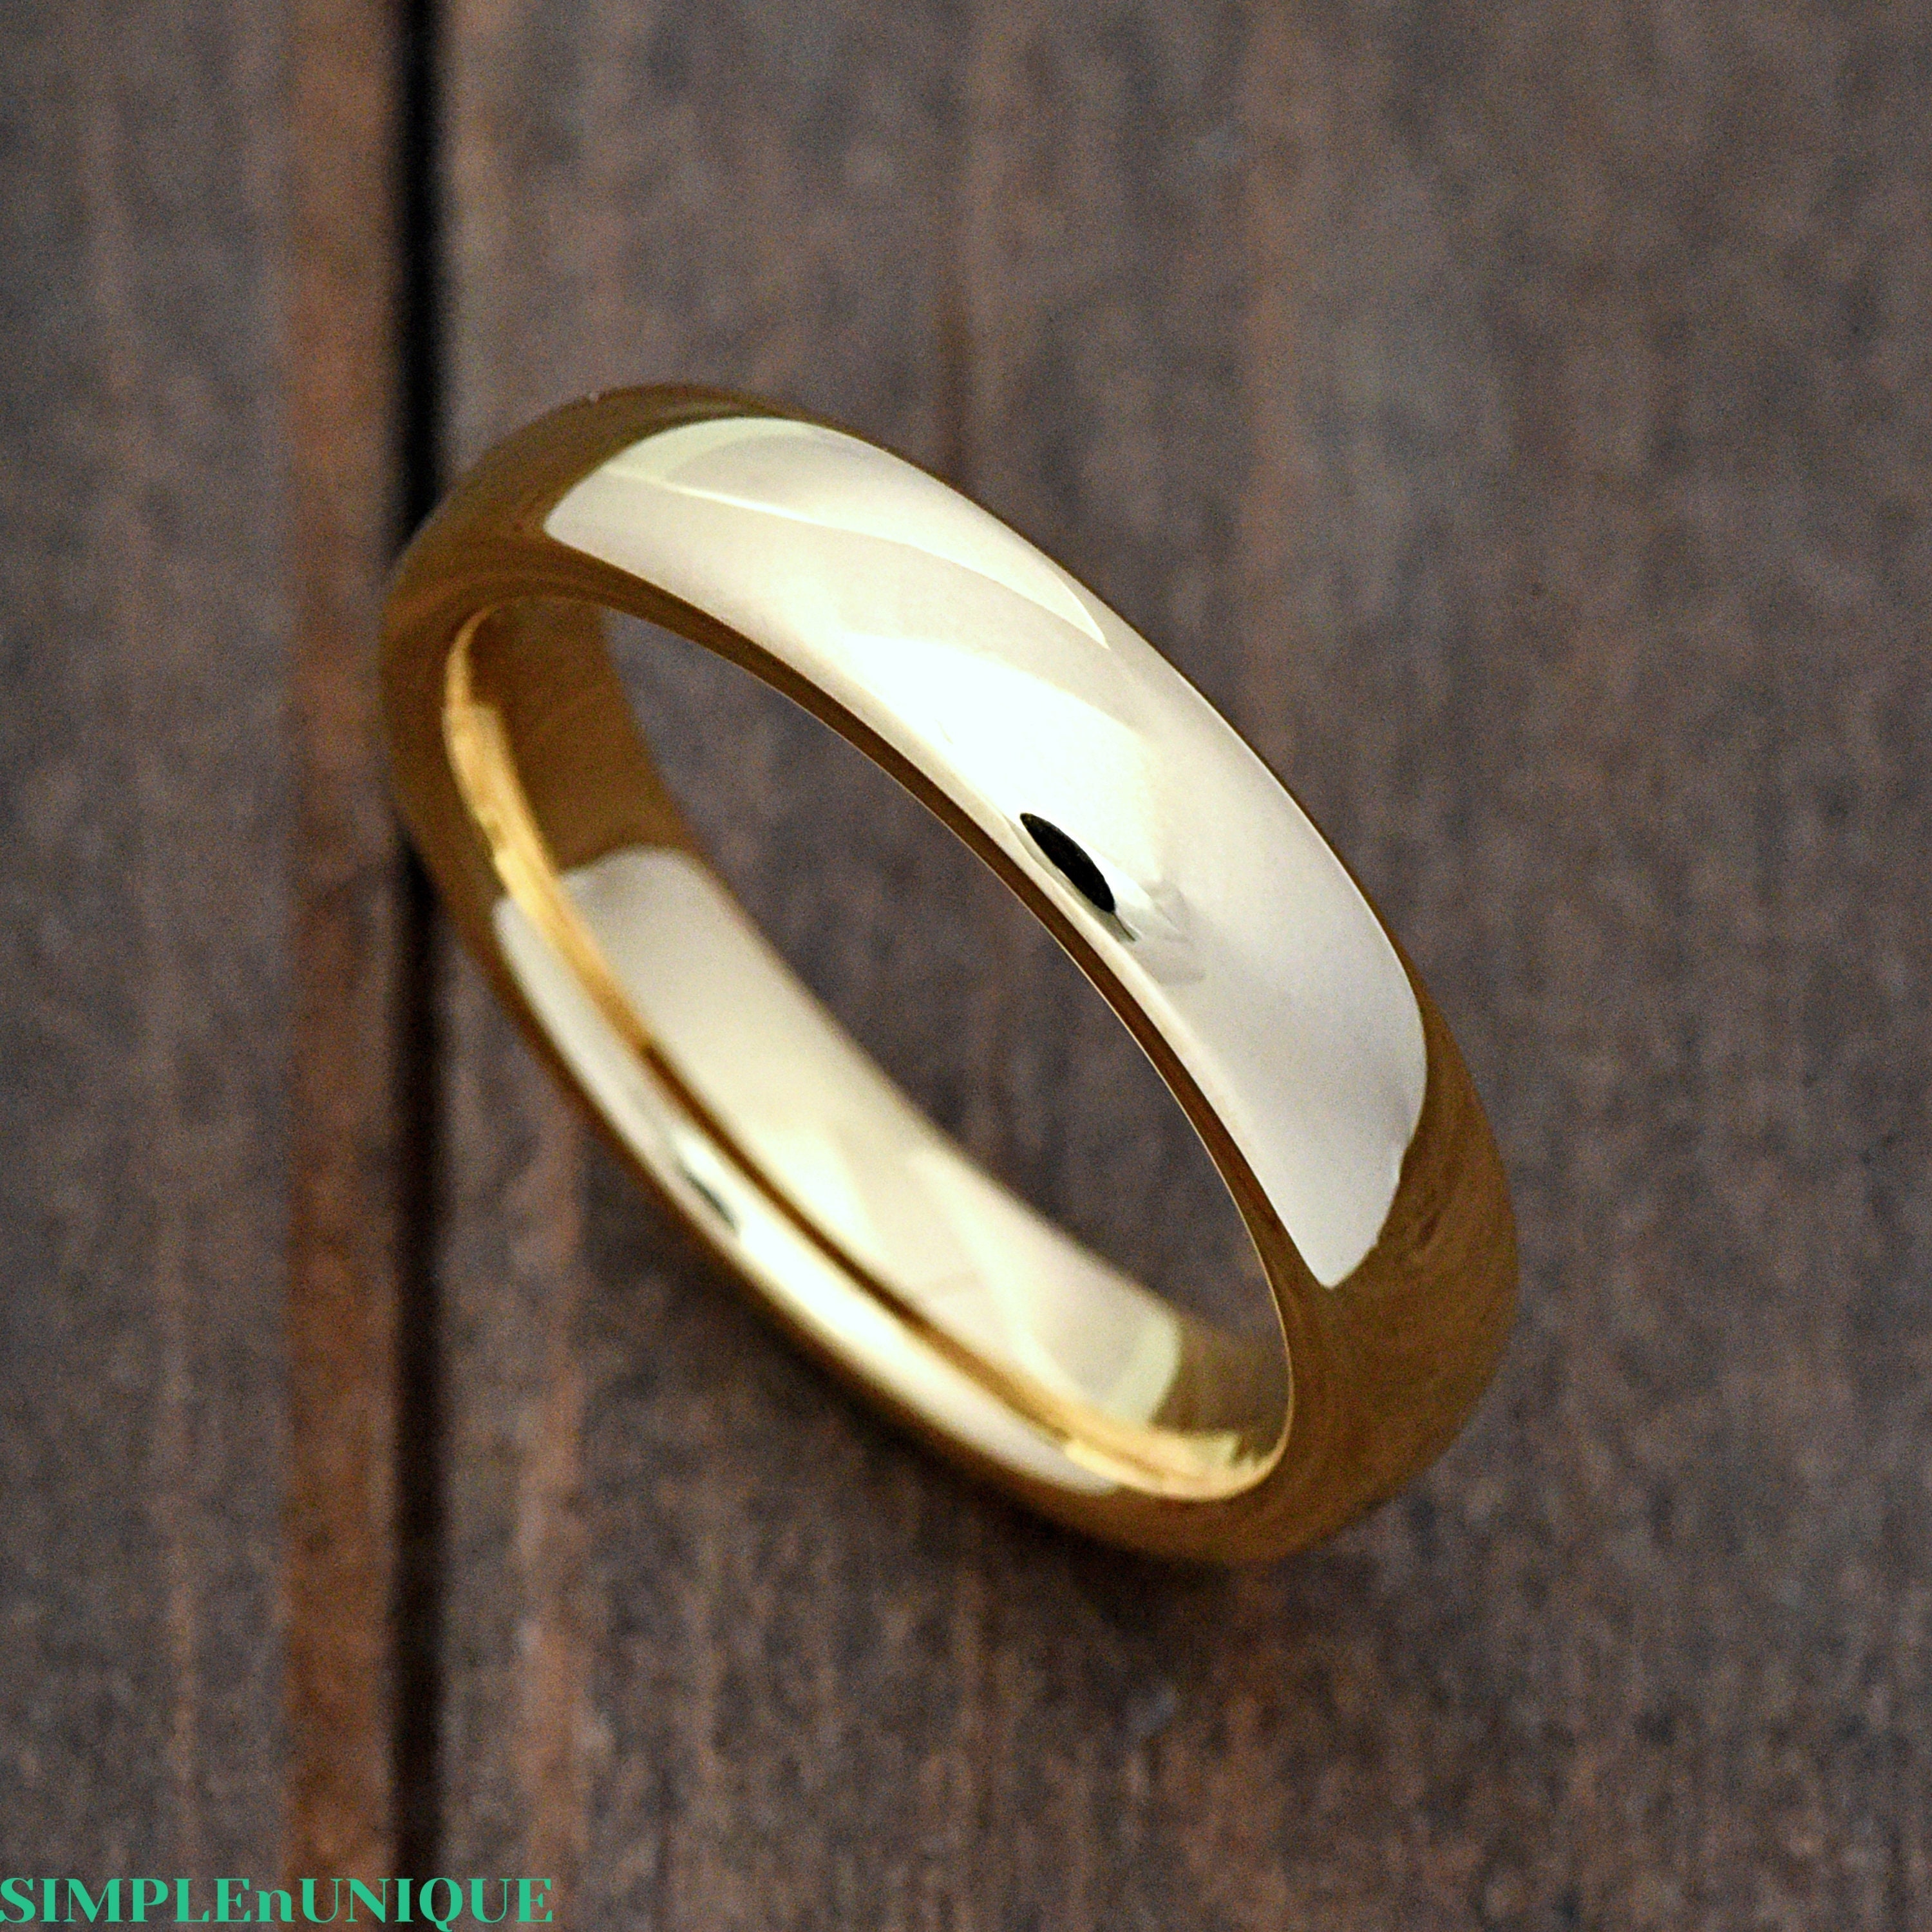 Gold or Silver Faux Wedding Bands, Fake Wedding Rings, Craft Wedding Bands,  Pair of Rings 